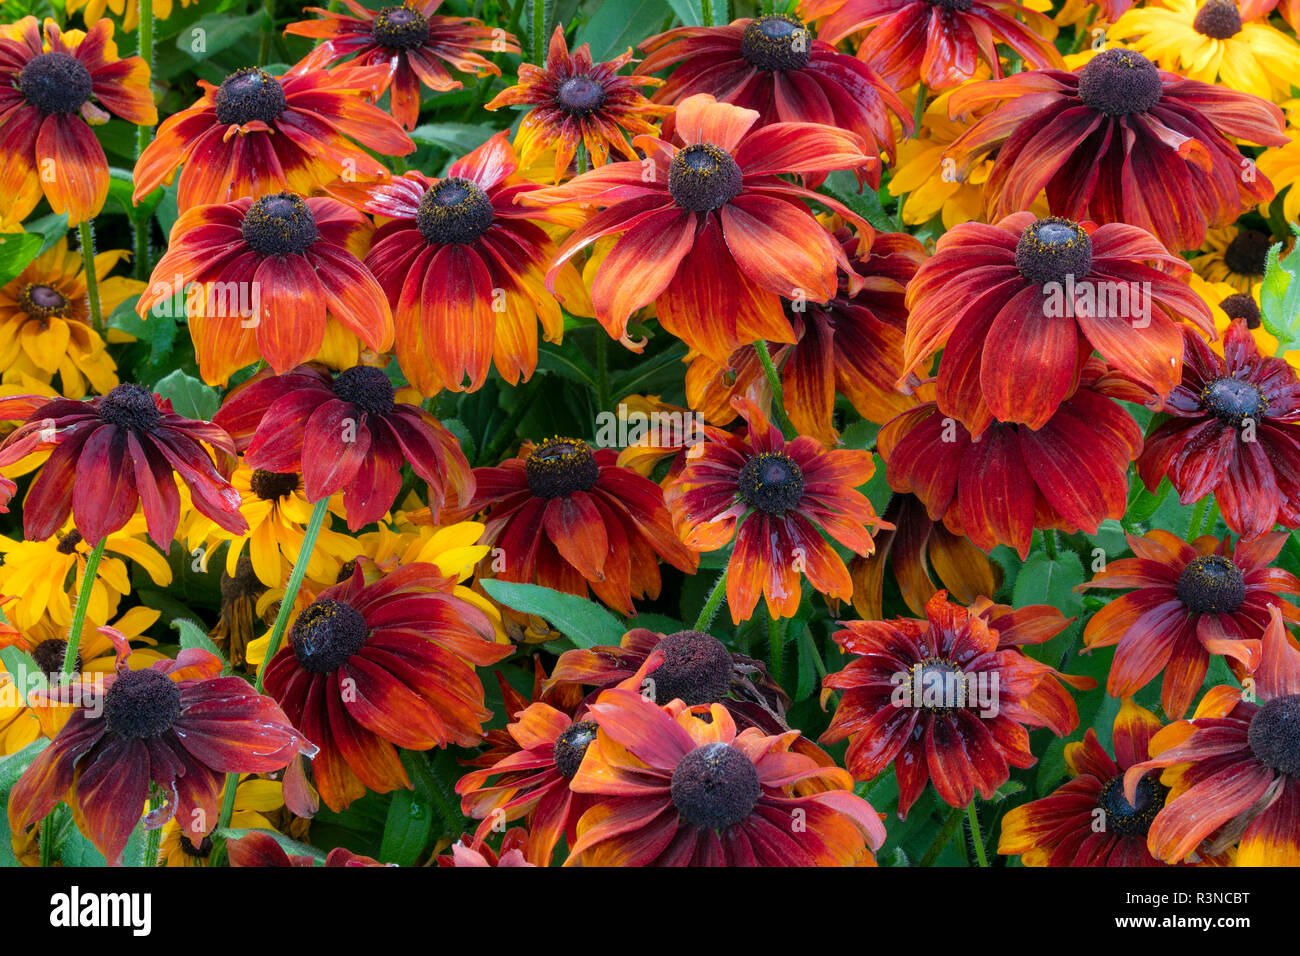 Canada, British Columbia, Chetwynd. Close-up of Rudbeckia flowers. Stock Photo